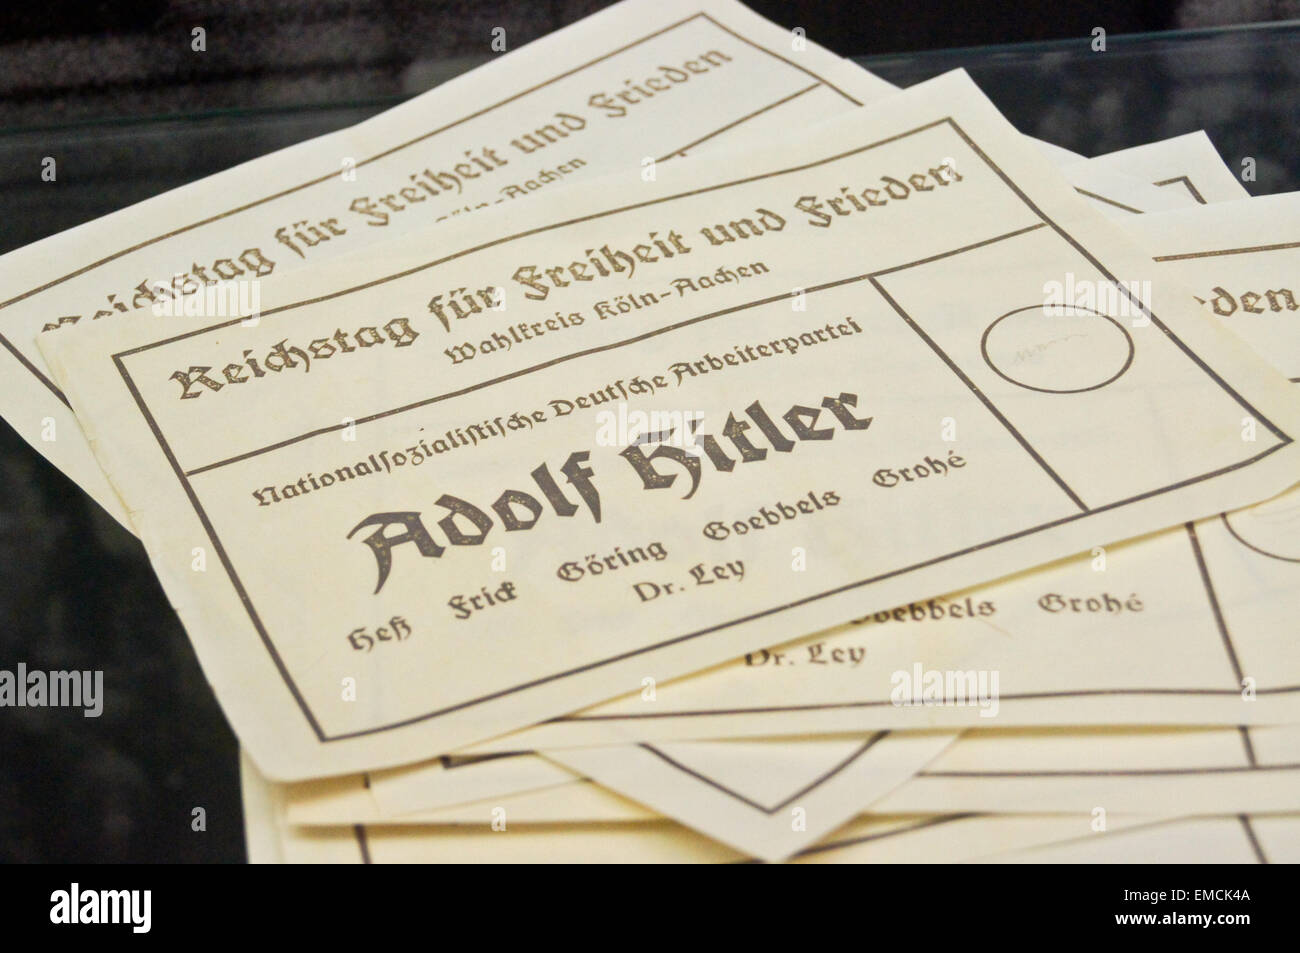 A ballot paper for the Reichstag with Adolf Hitler as the only candidate, 1933, Stadtmuseum, Koln, Nordrhein-Westfalen, Germany Stock Photo